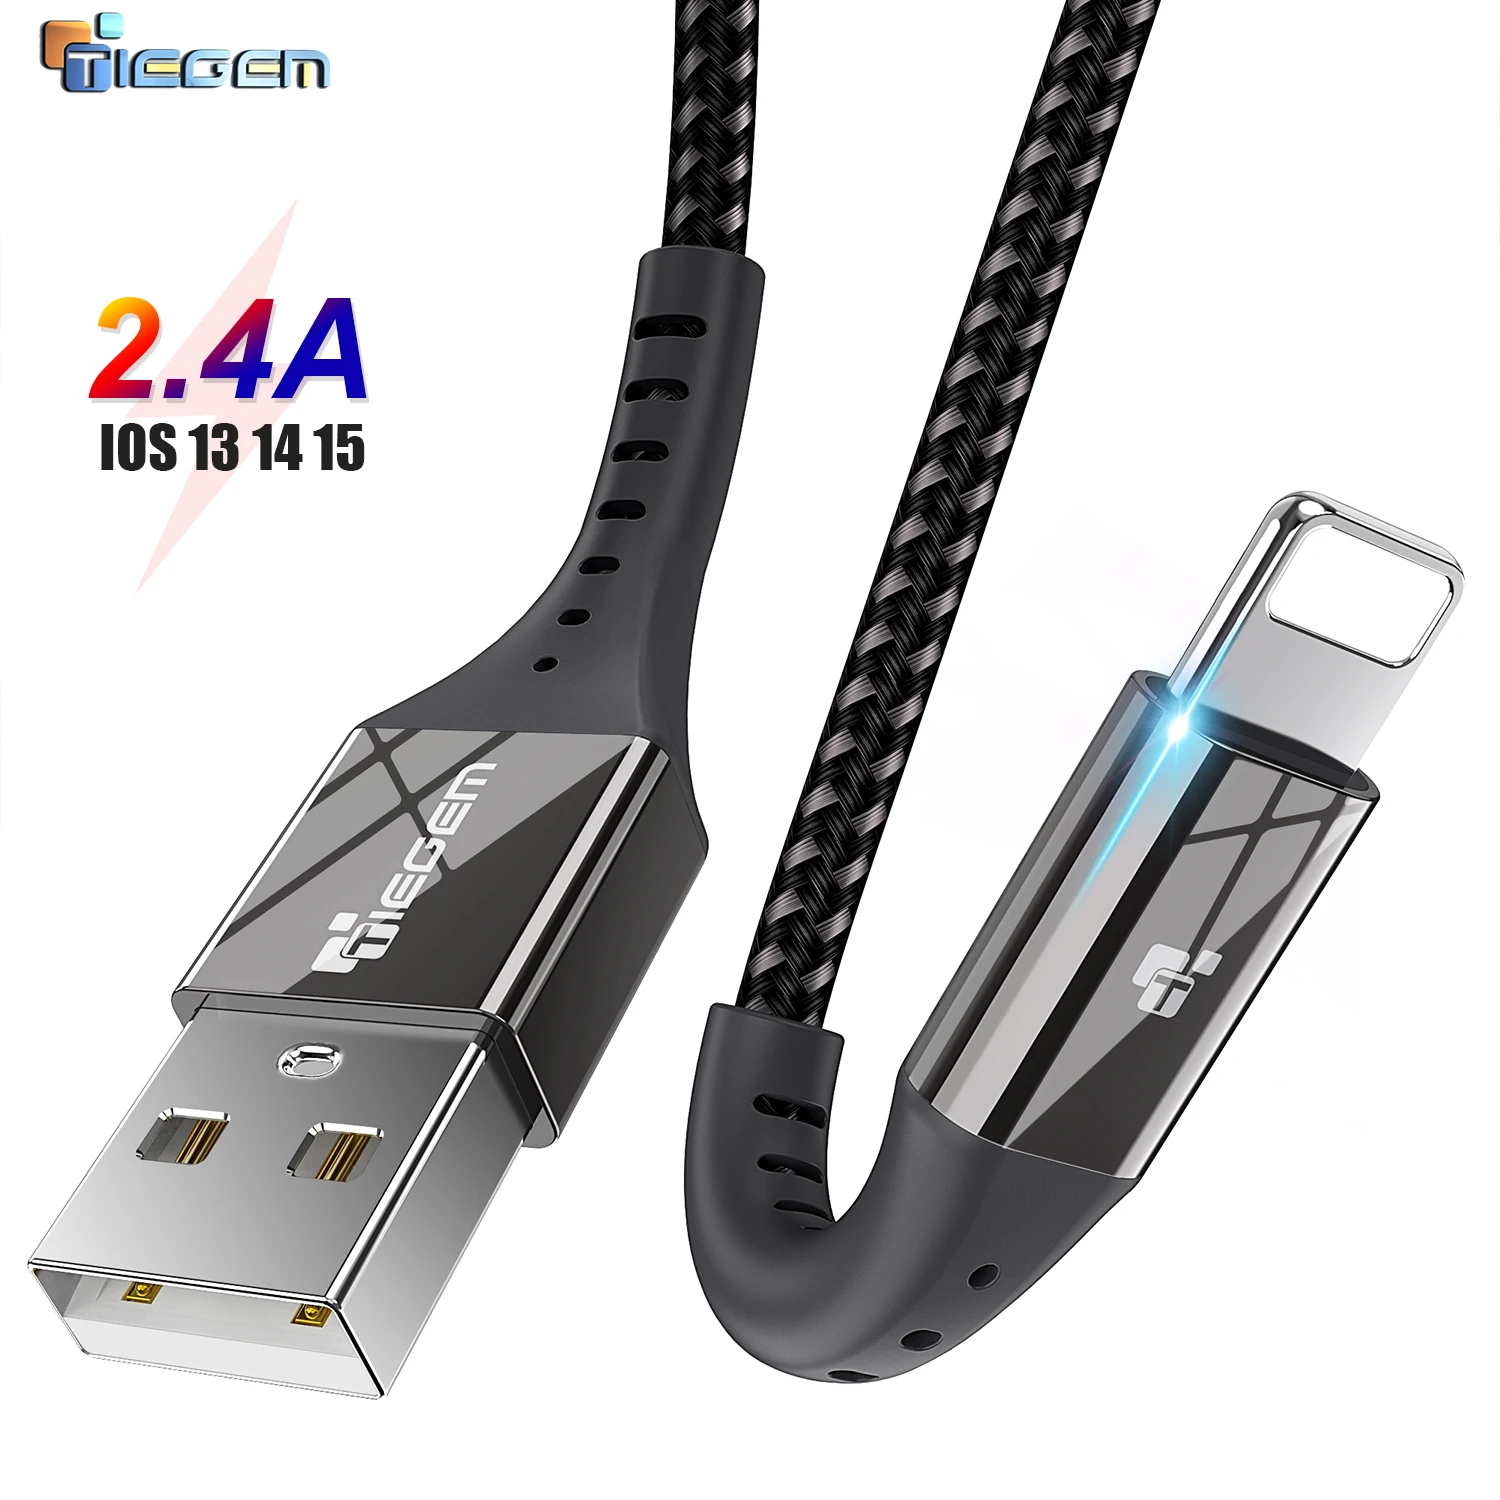 

TIEGEM EX-long Usb Cable For Iphone cable 11 12 13 pro max Xs Xr X SE 8 7 6 plus 6s 5 ipad air mini fast charging cable charger